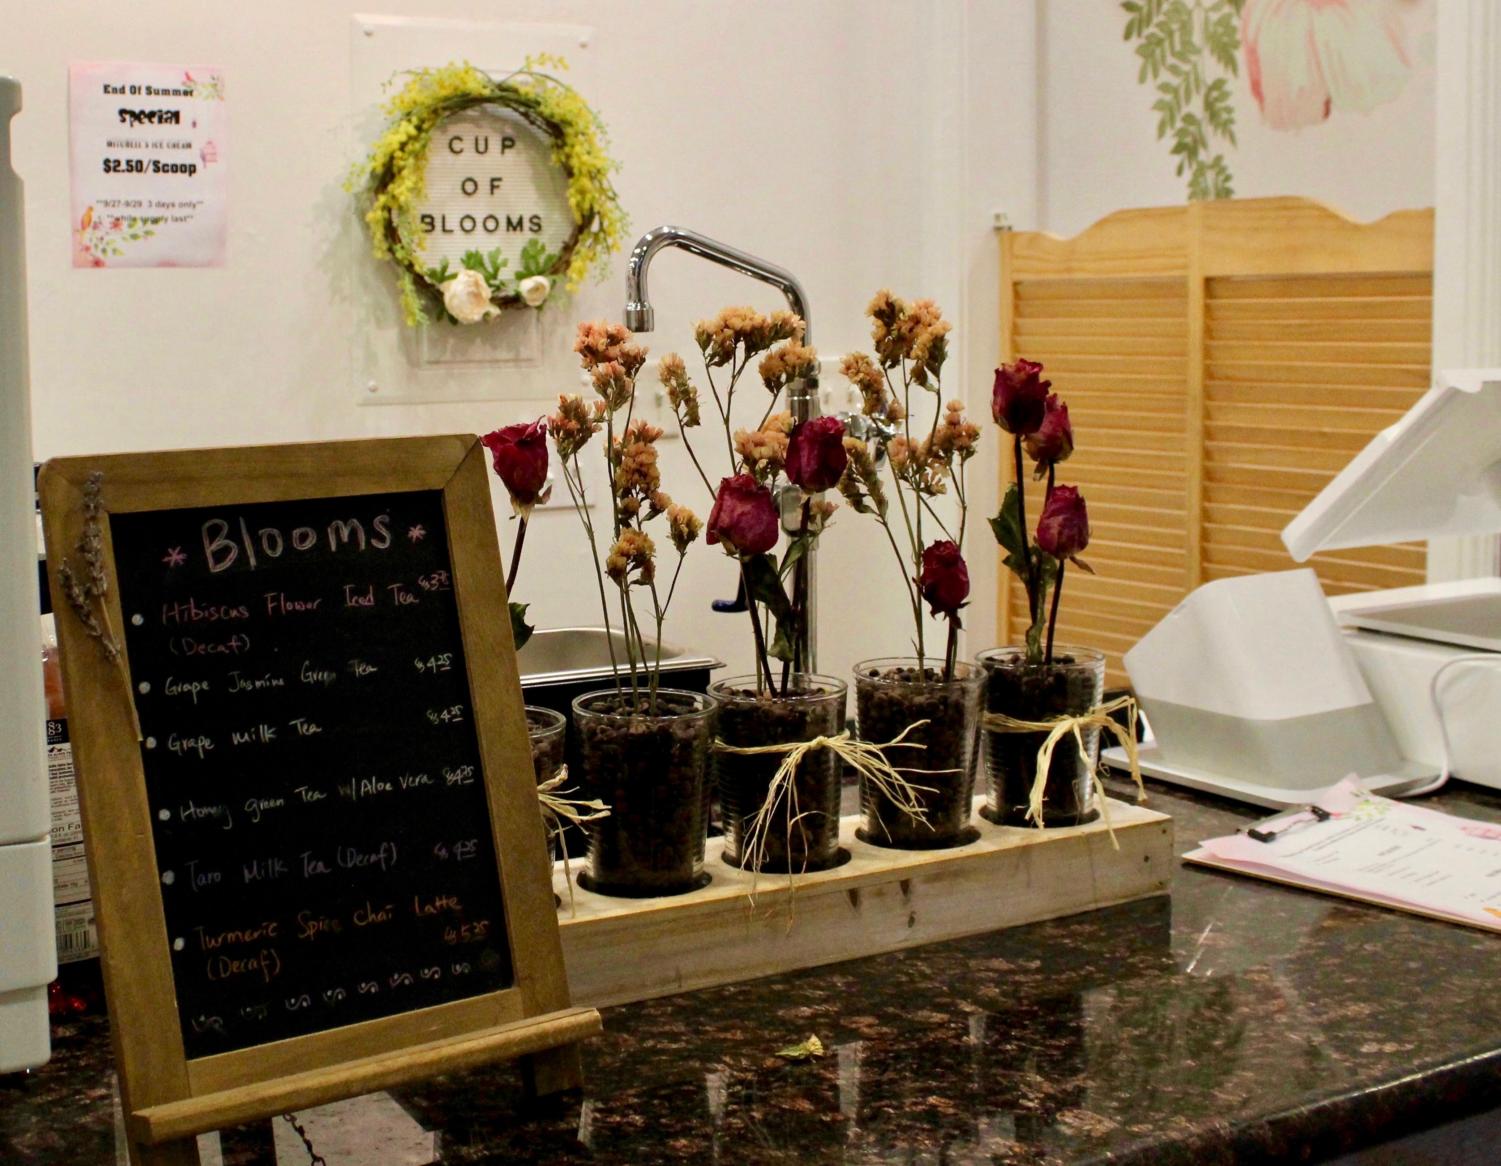 Cup Of Blooms Offers More Than Its Competitors Scot Scoop News